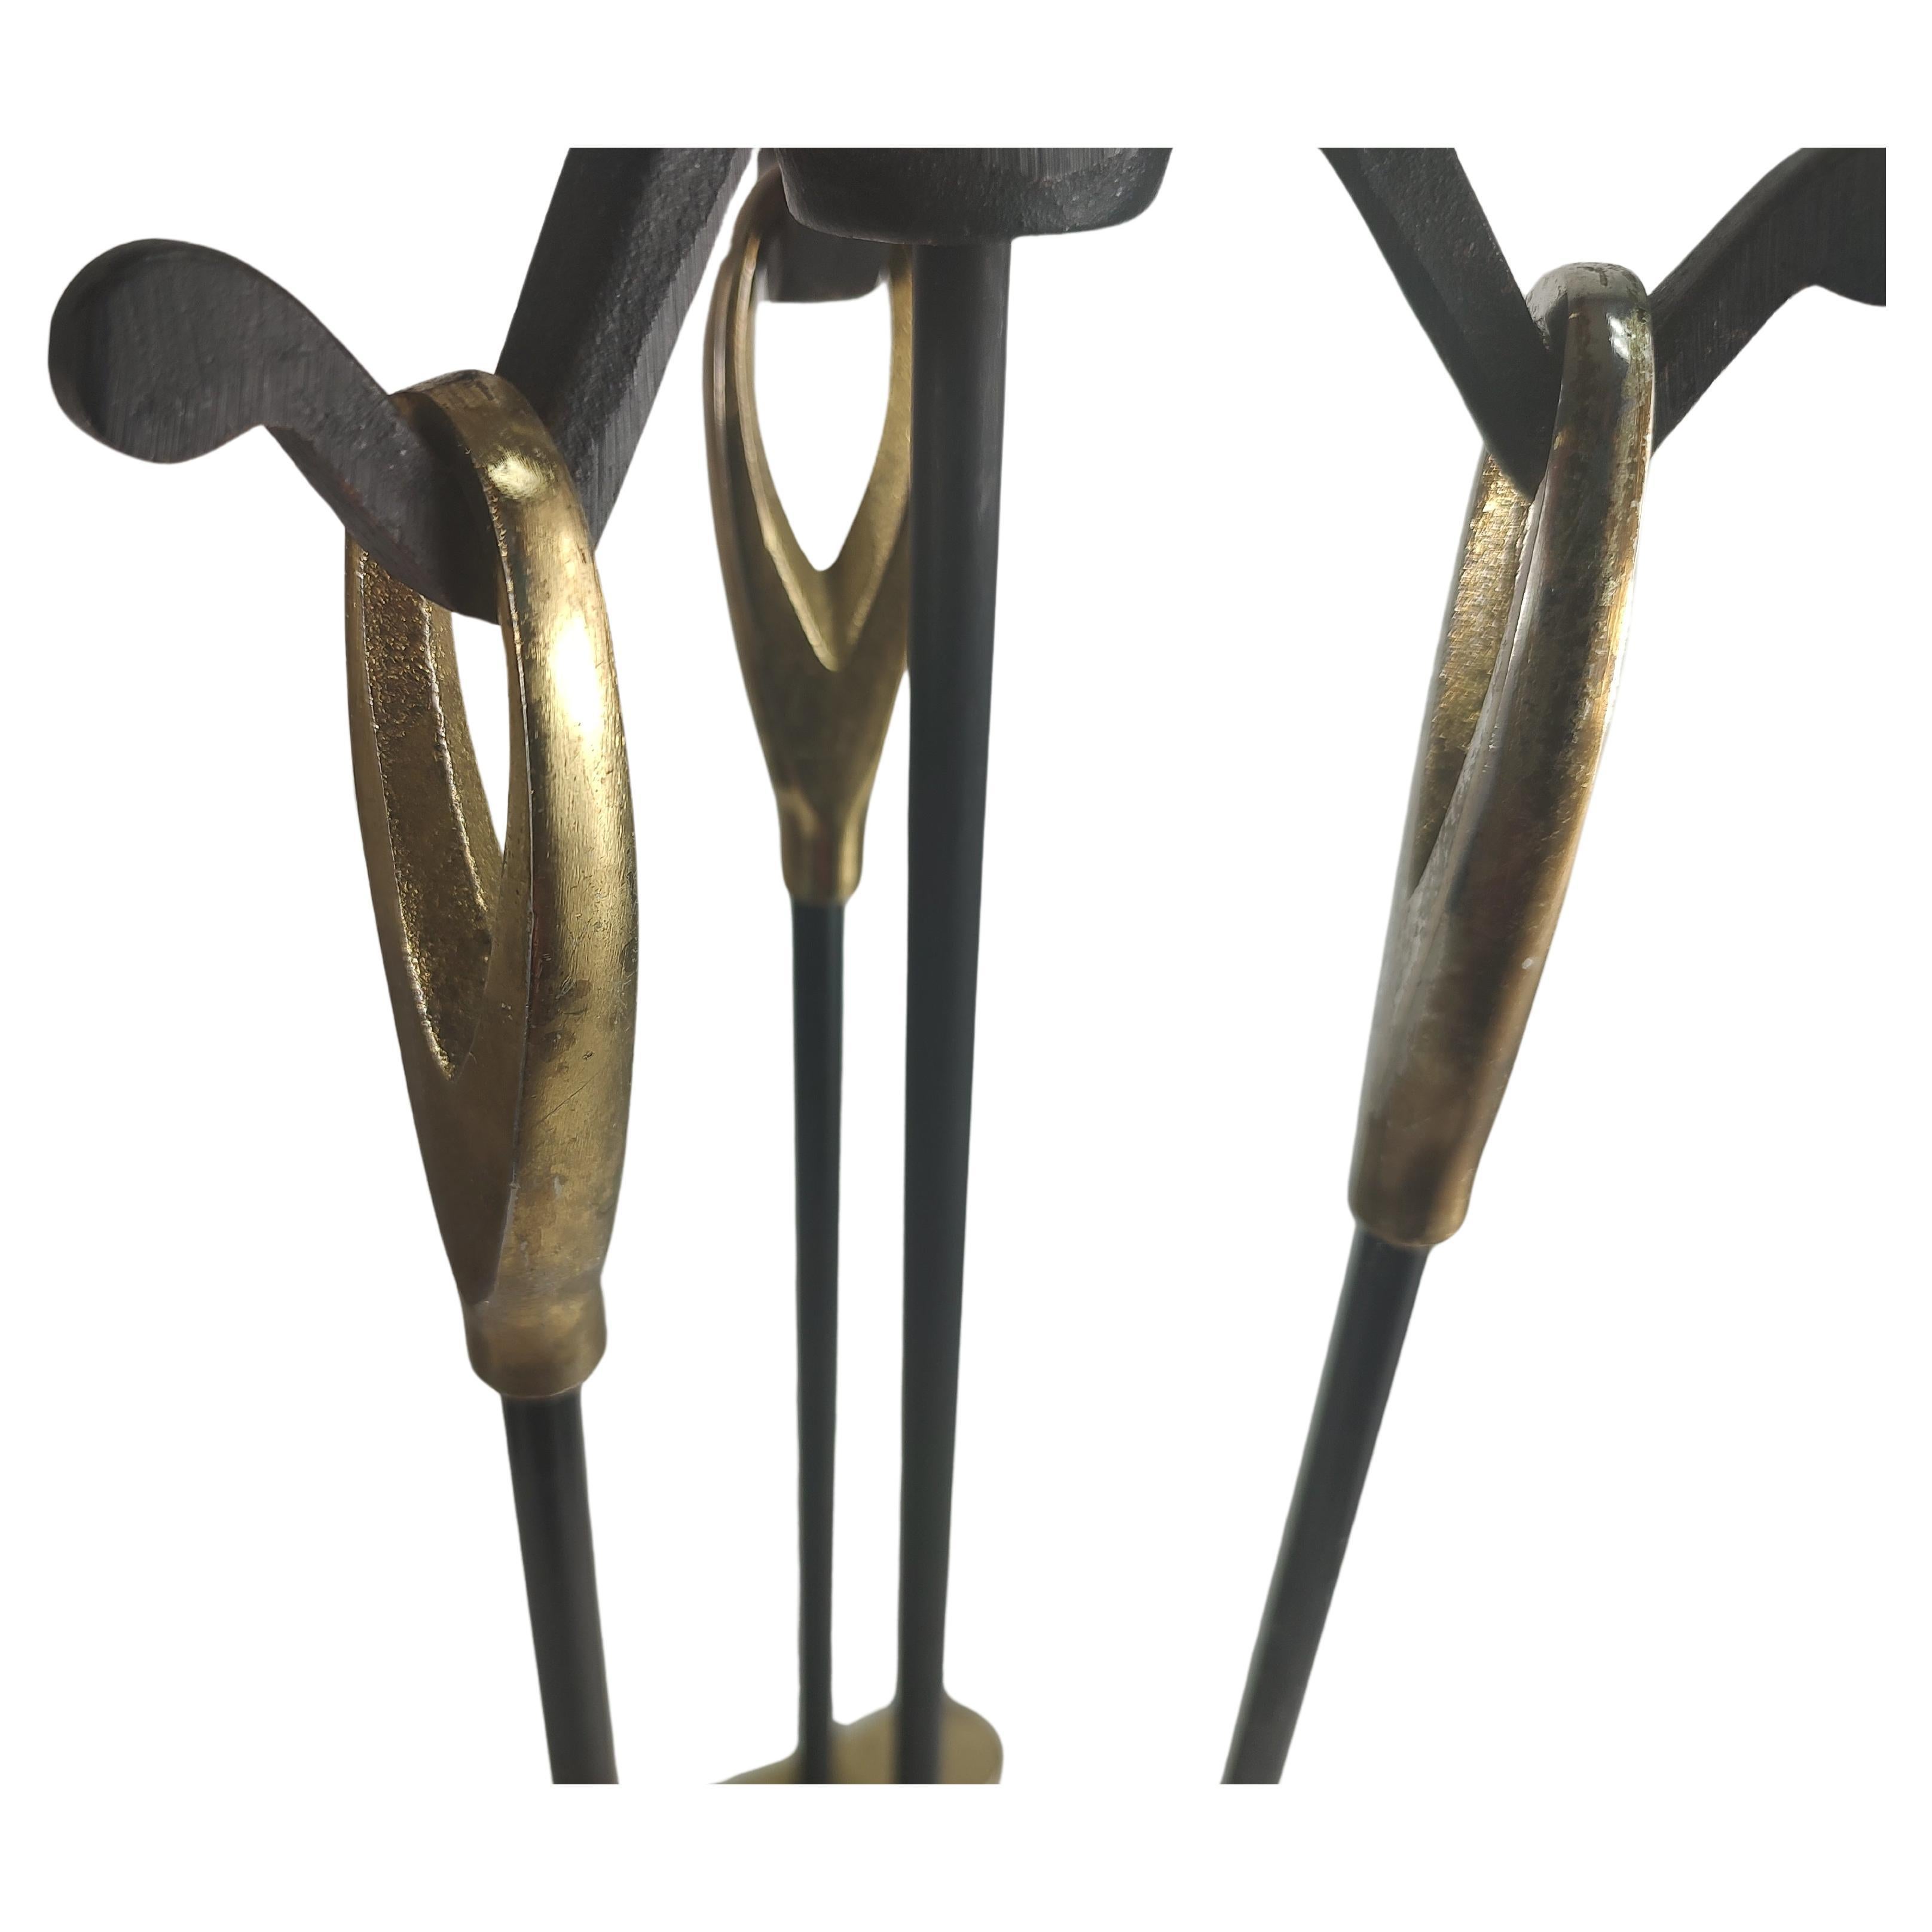 Fabulous 4 piece set of fireplace tools. Consists of brush poker shovel and the holder. Iron with brass accent handles in a teardrop form. Petite set for the smaller area, possibly a bedroom fireplace. In excellent vintage condition with minimal